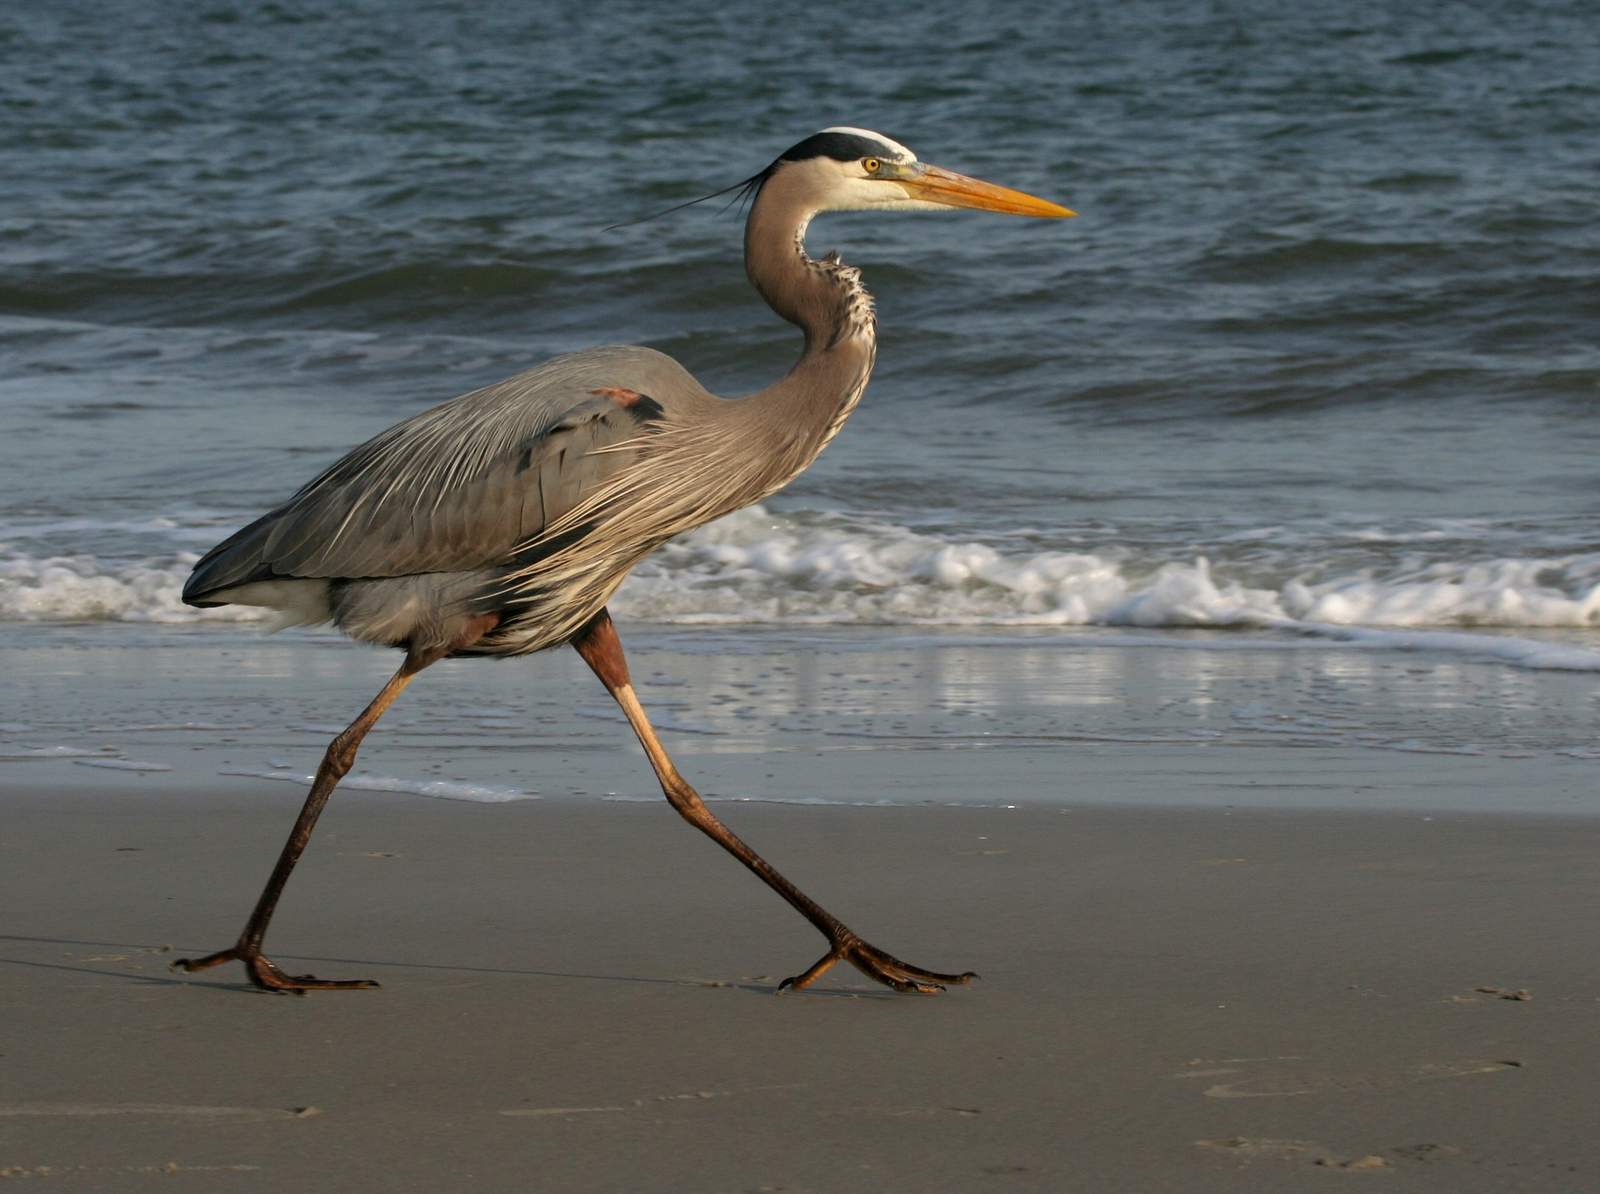 Migratory birds are back at Padre Island National Seashore... and so are their antics, officials say